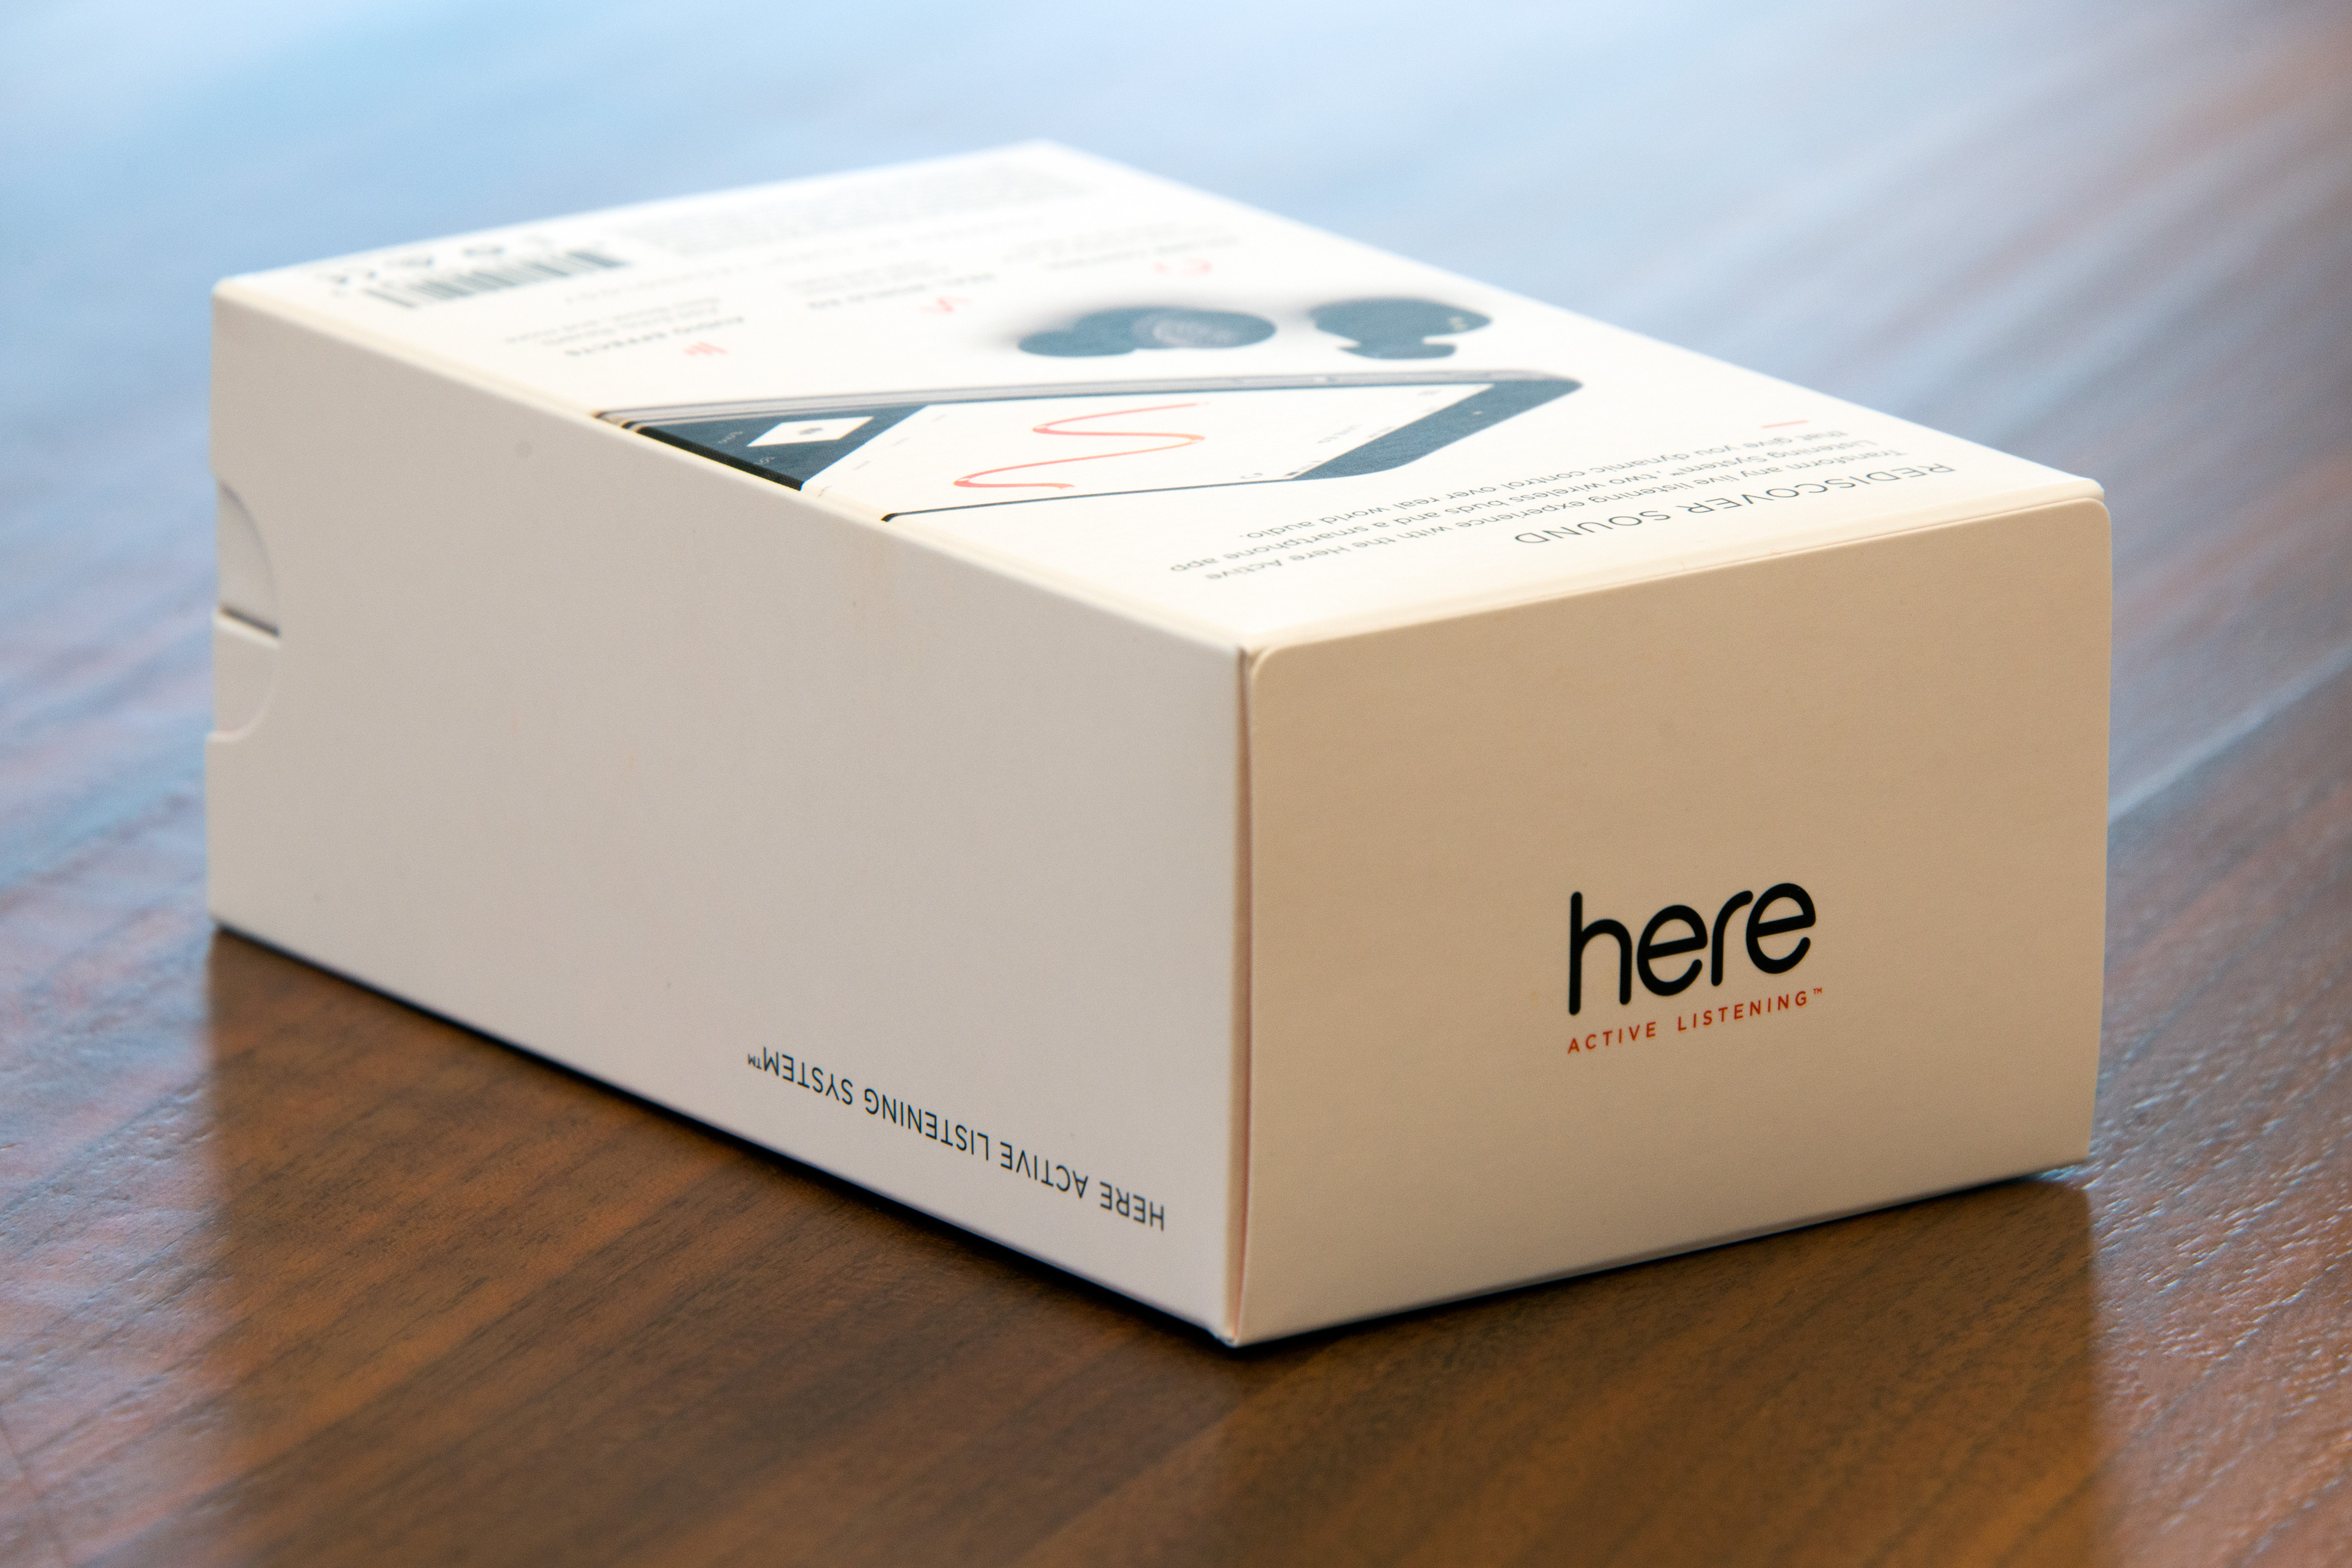 here active listening system hands on earbuds box2